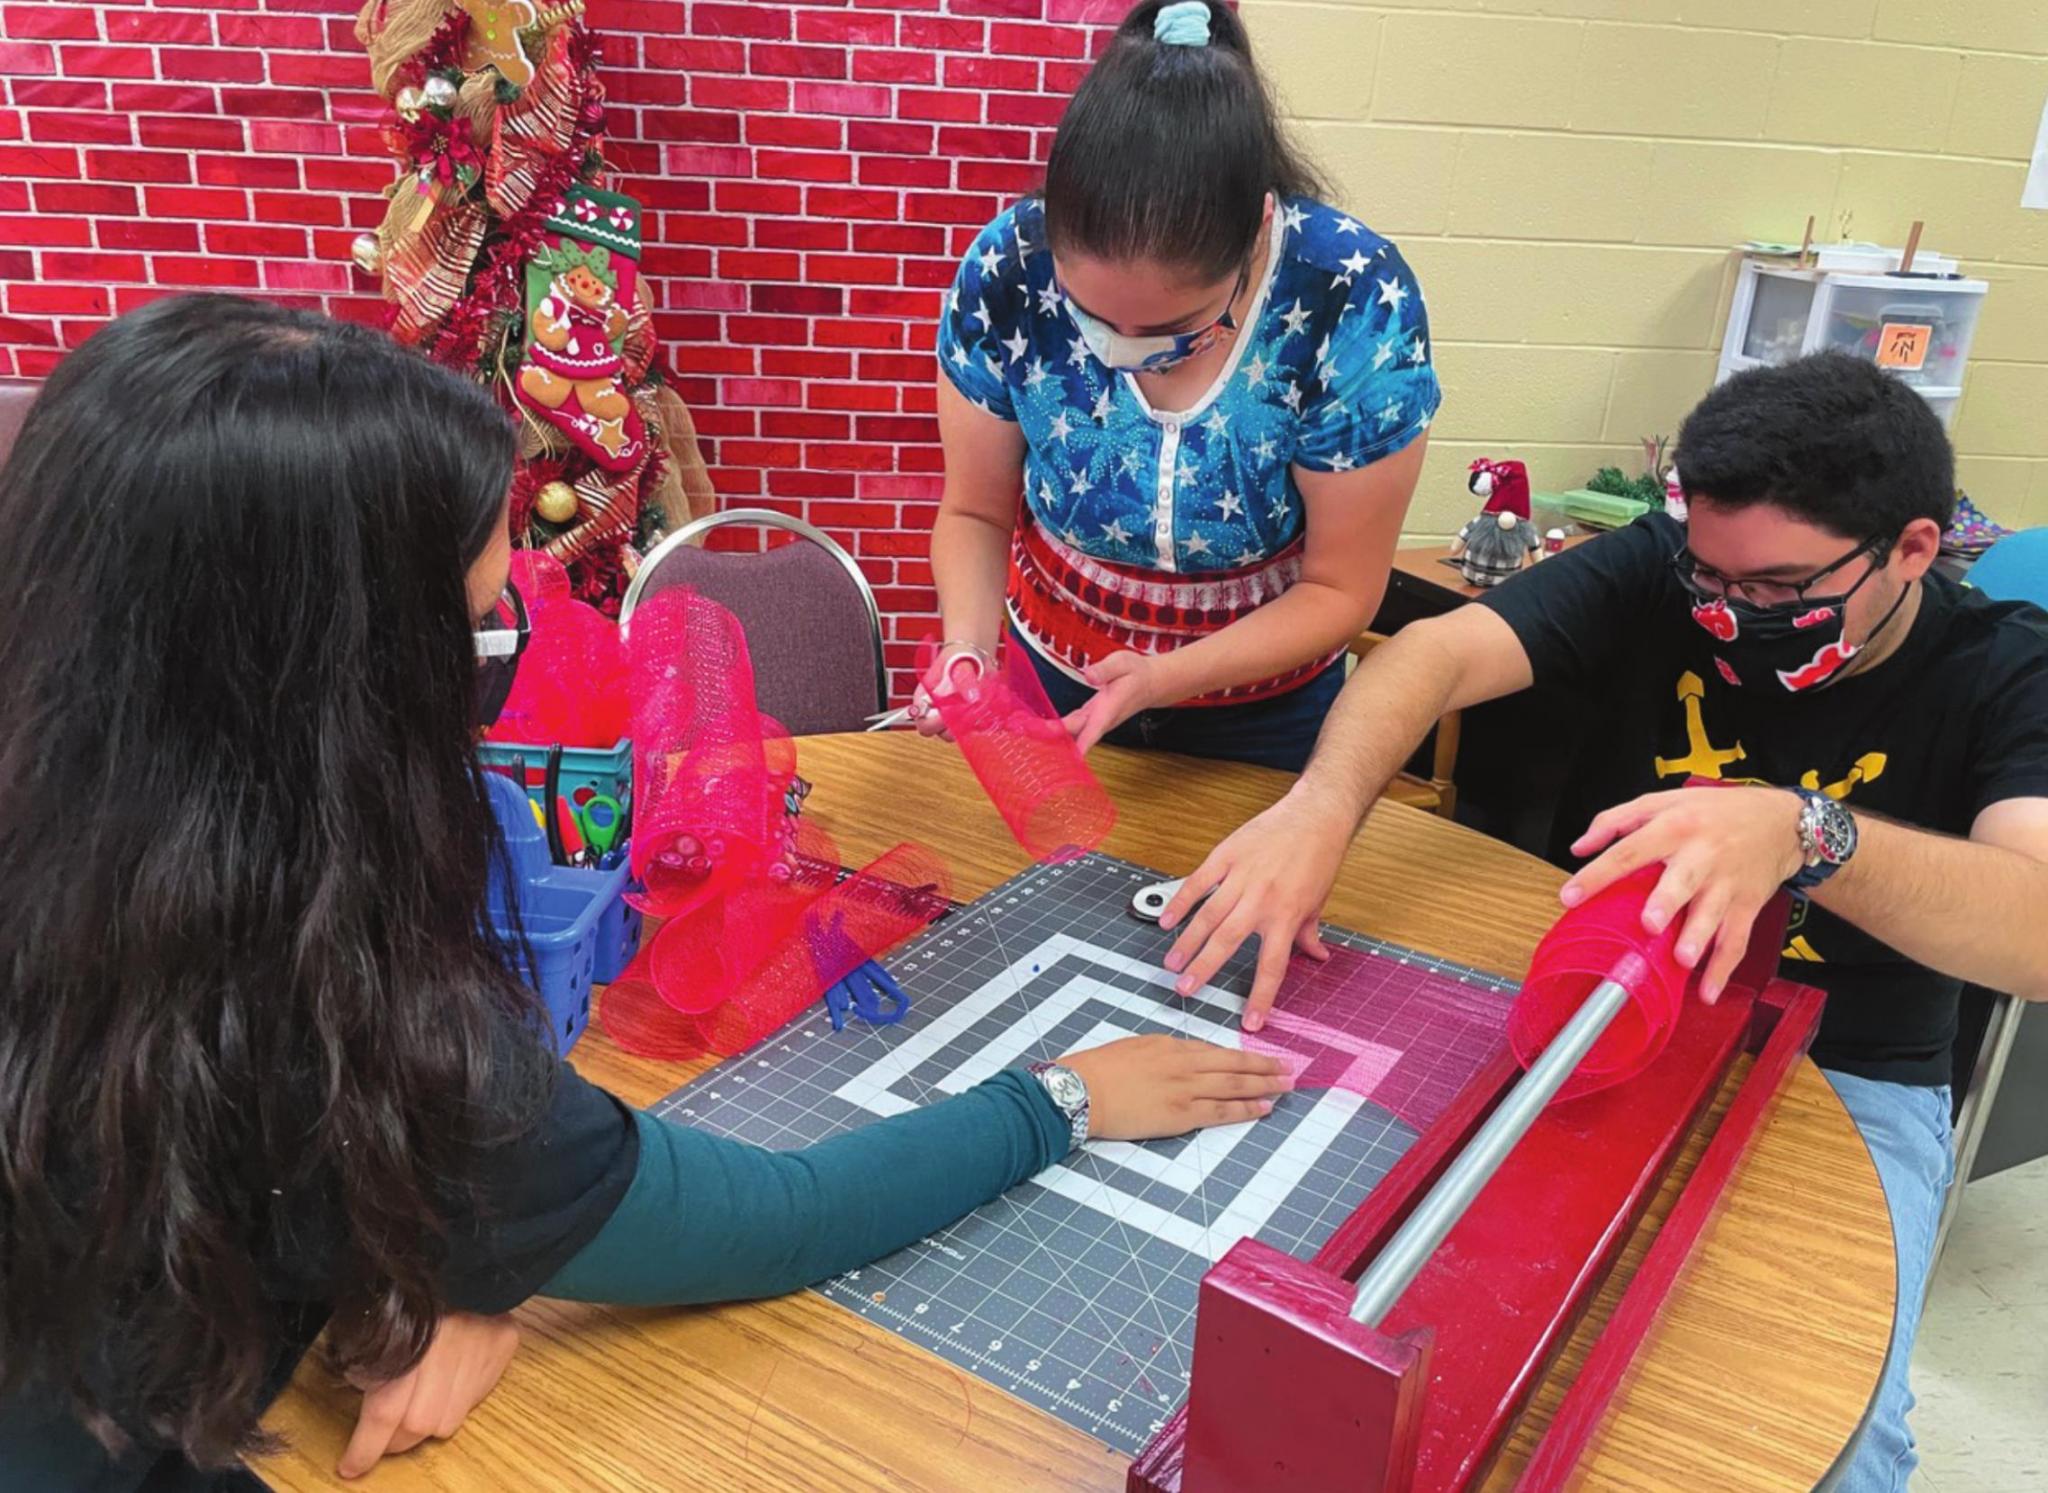 PSJA ISD, STC offer opportunities for students with disabilities The